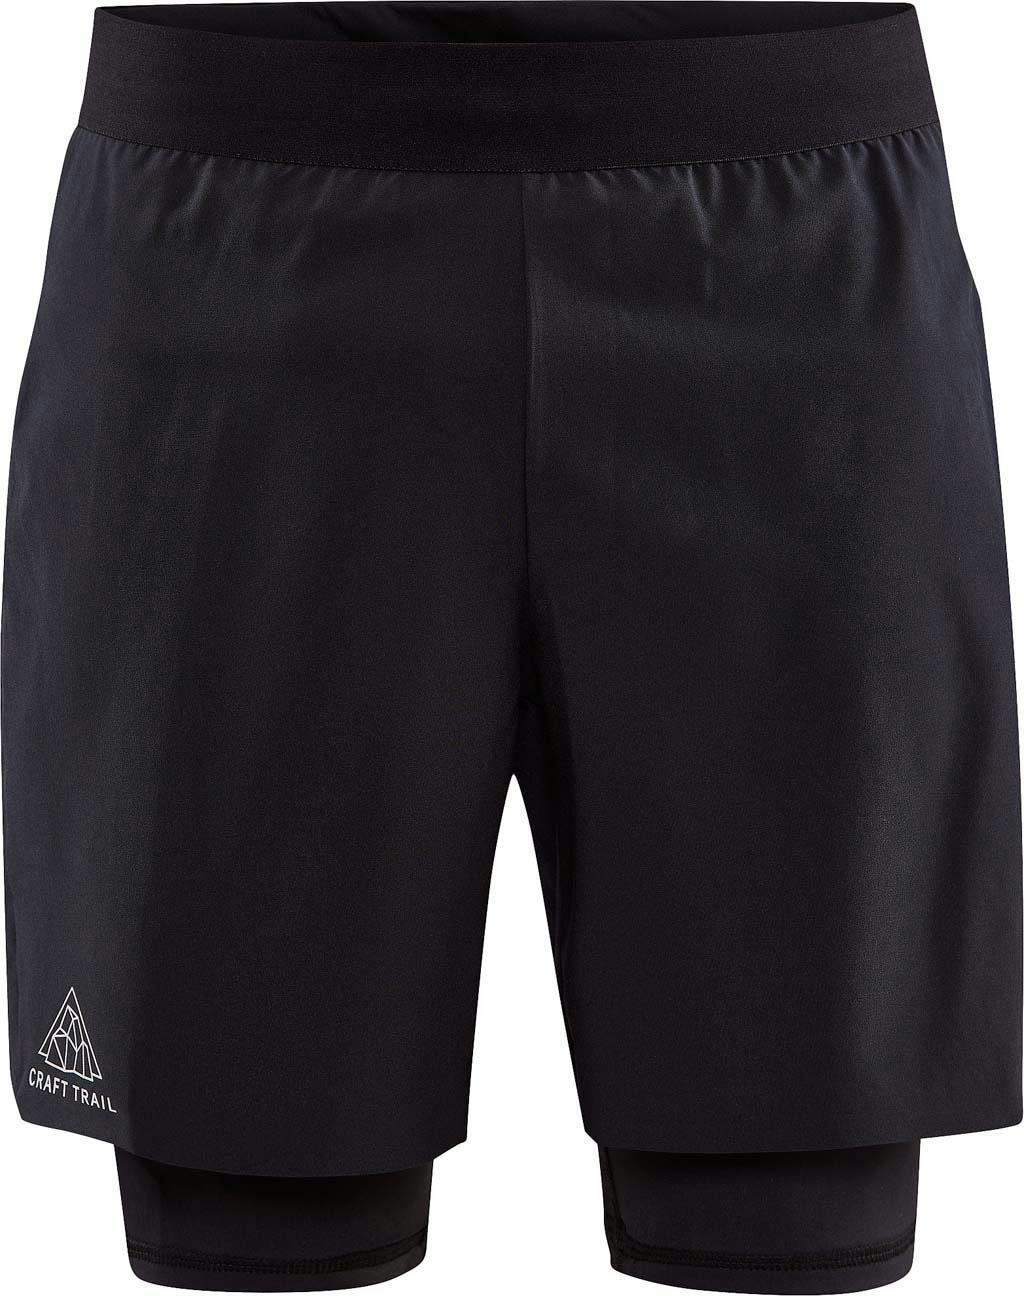 Product image for Pro Trail 2-In-1 Shorts - Men's